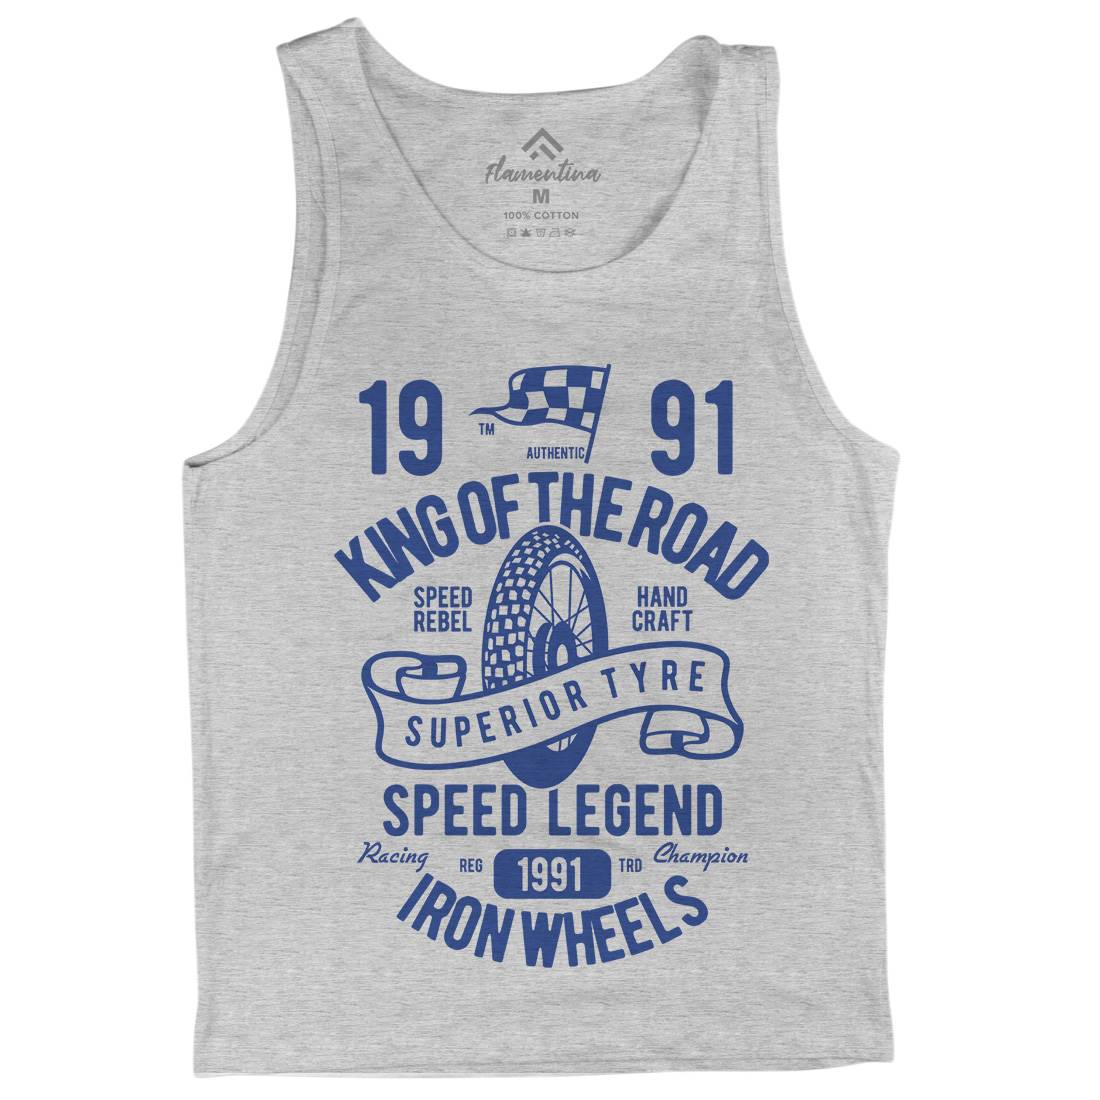 Superior Tyre King Of The Road Mens Tank Top Vest Motorcycles B458